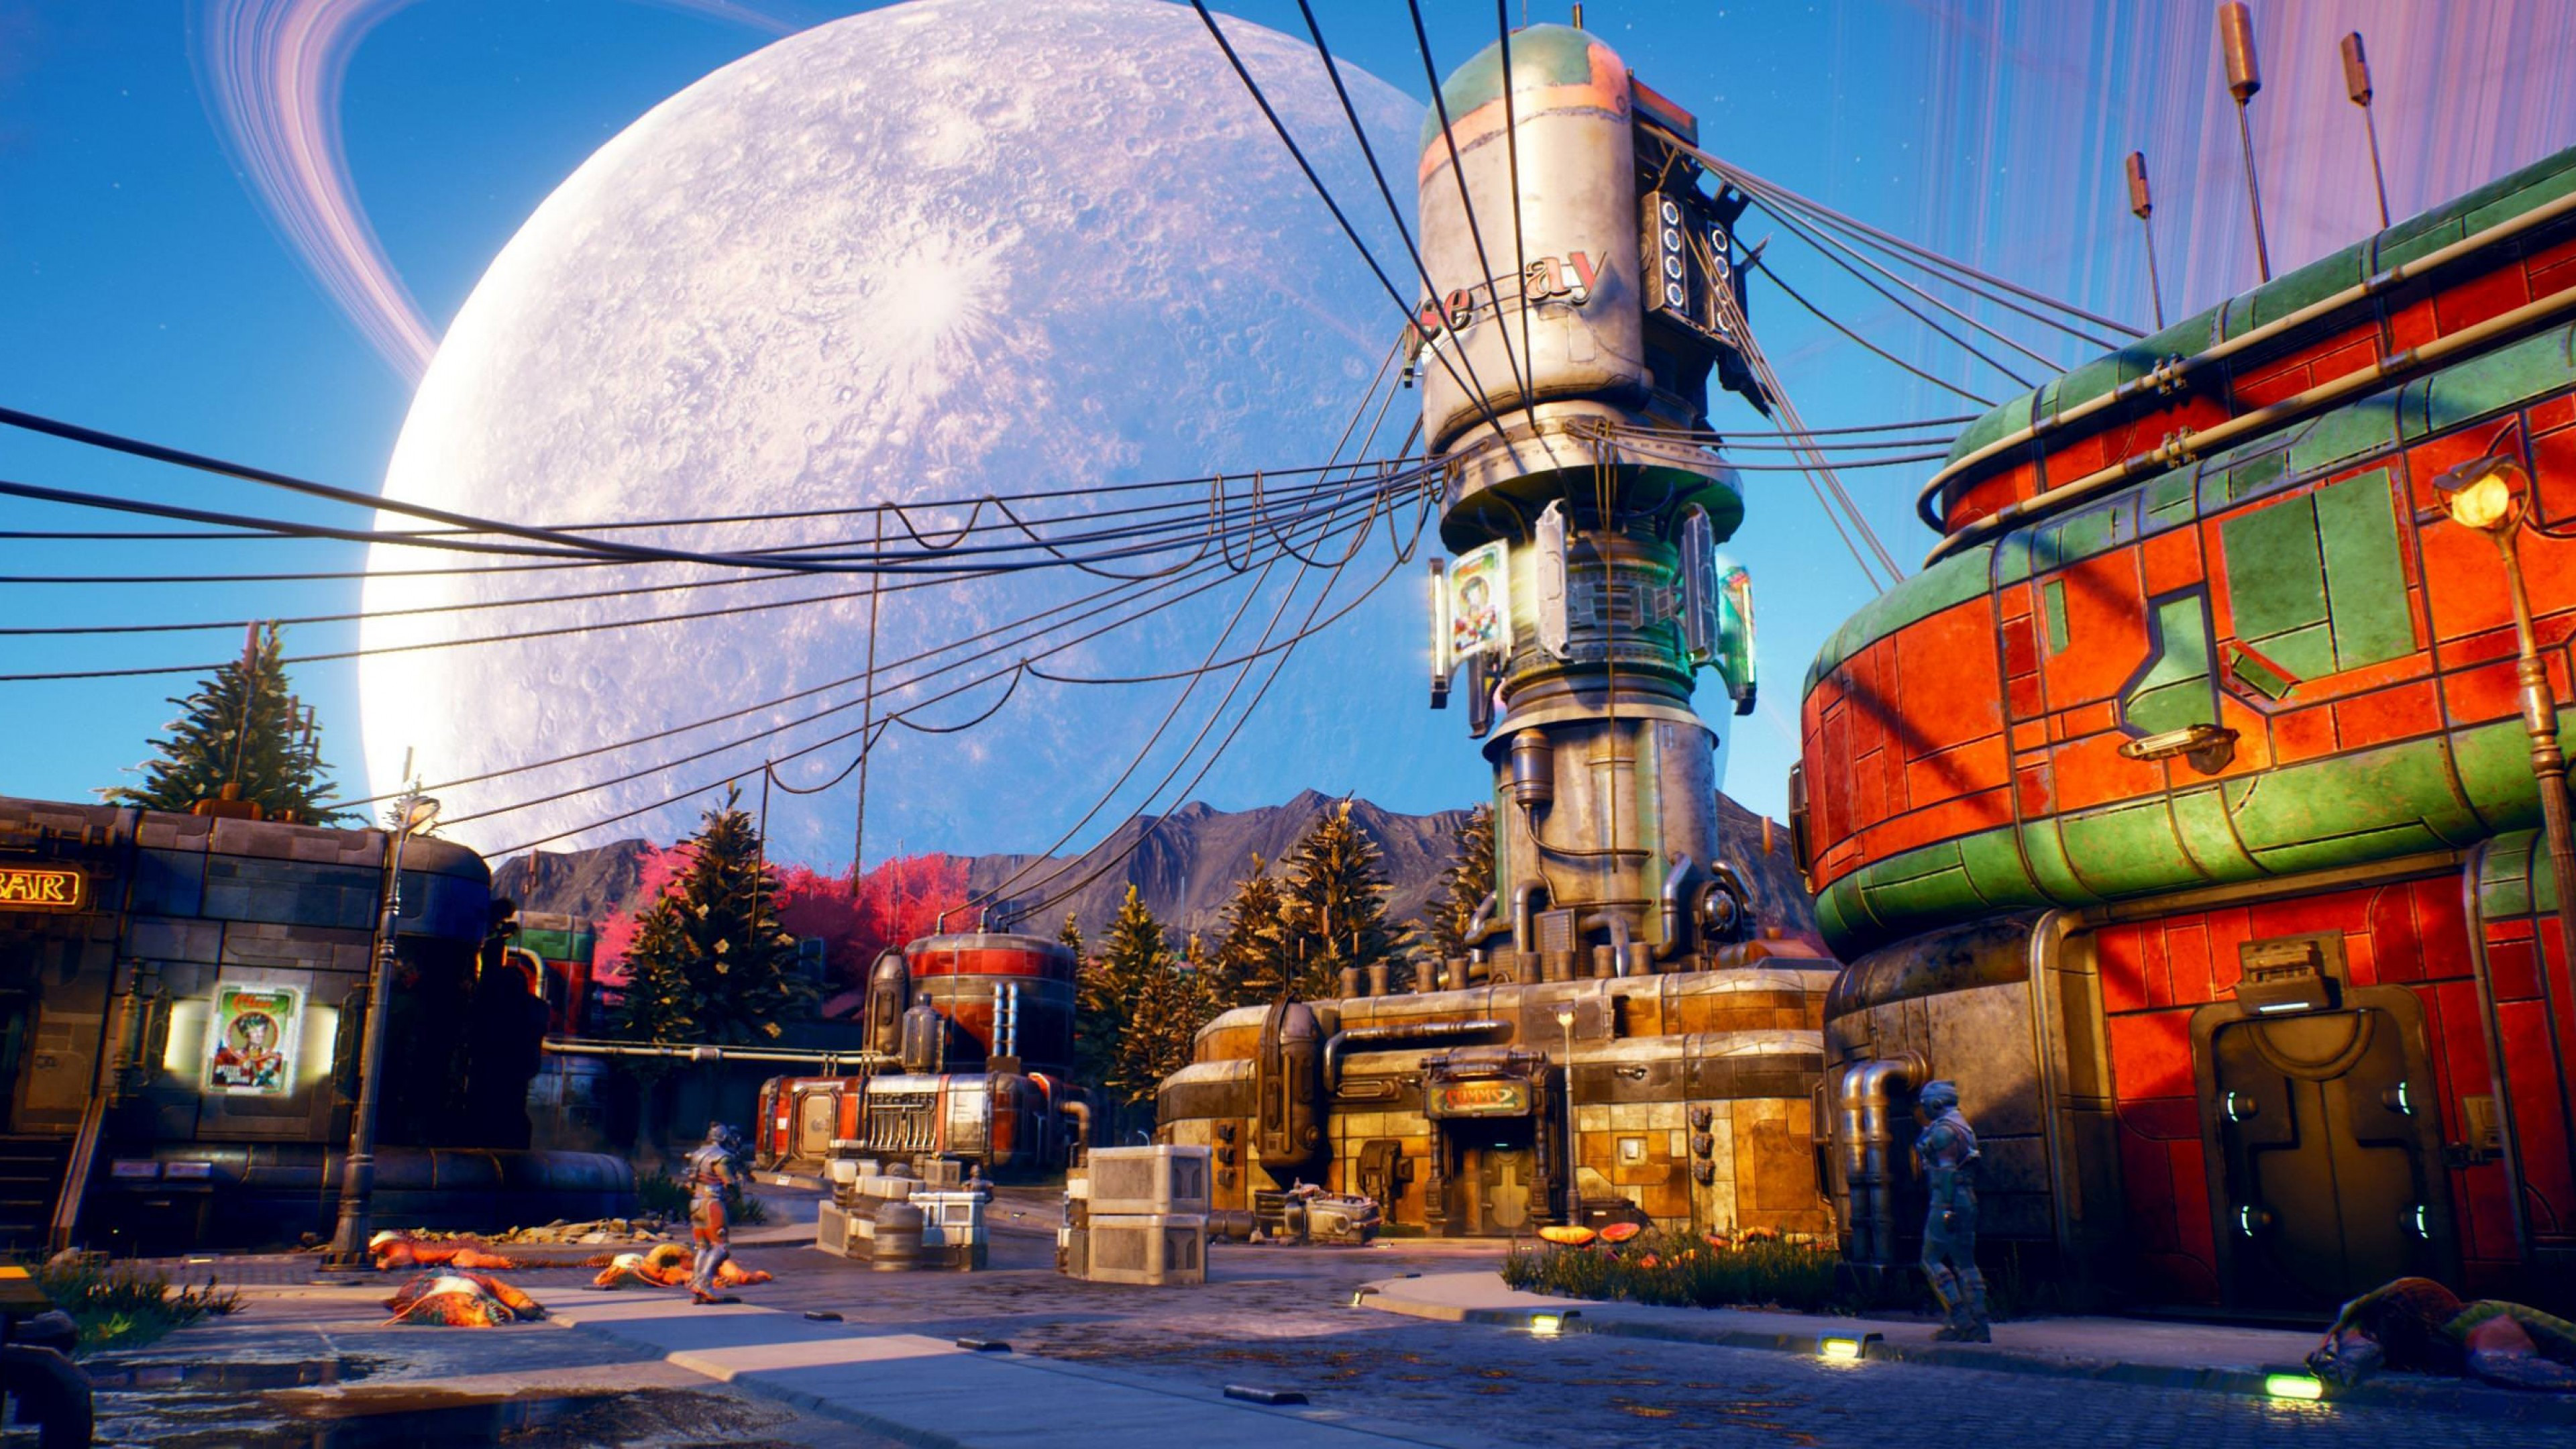 The Outer Worlds Wallpapers